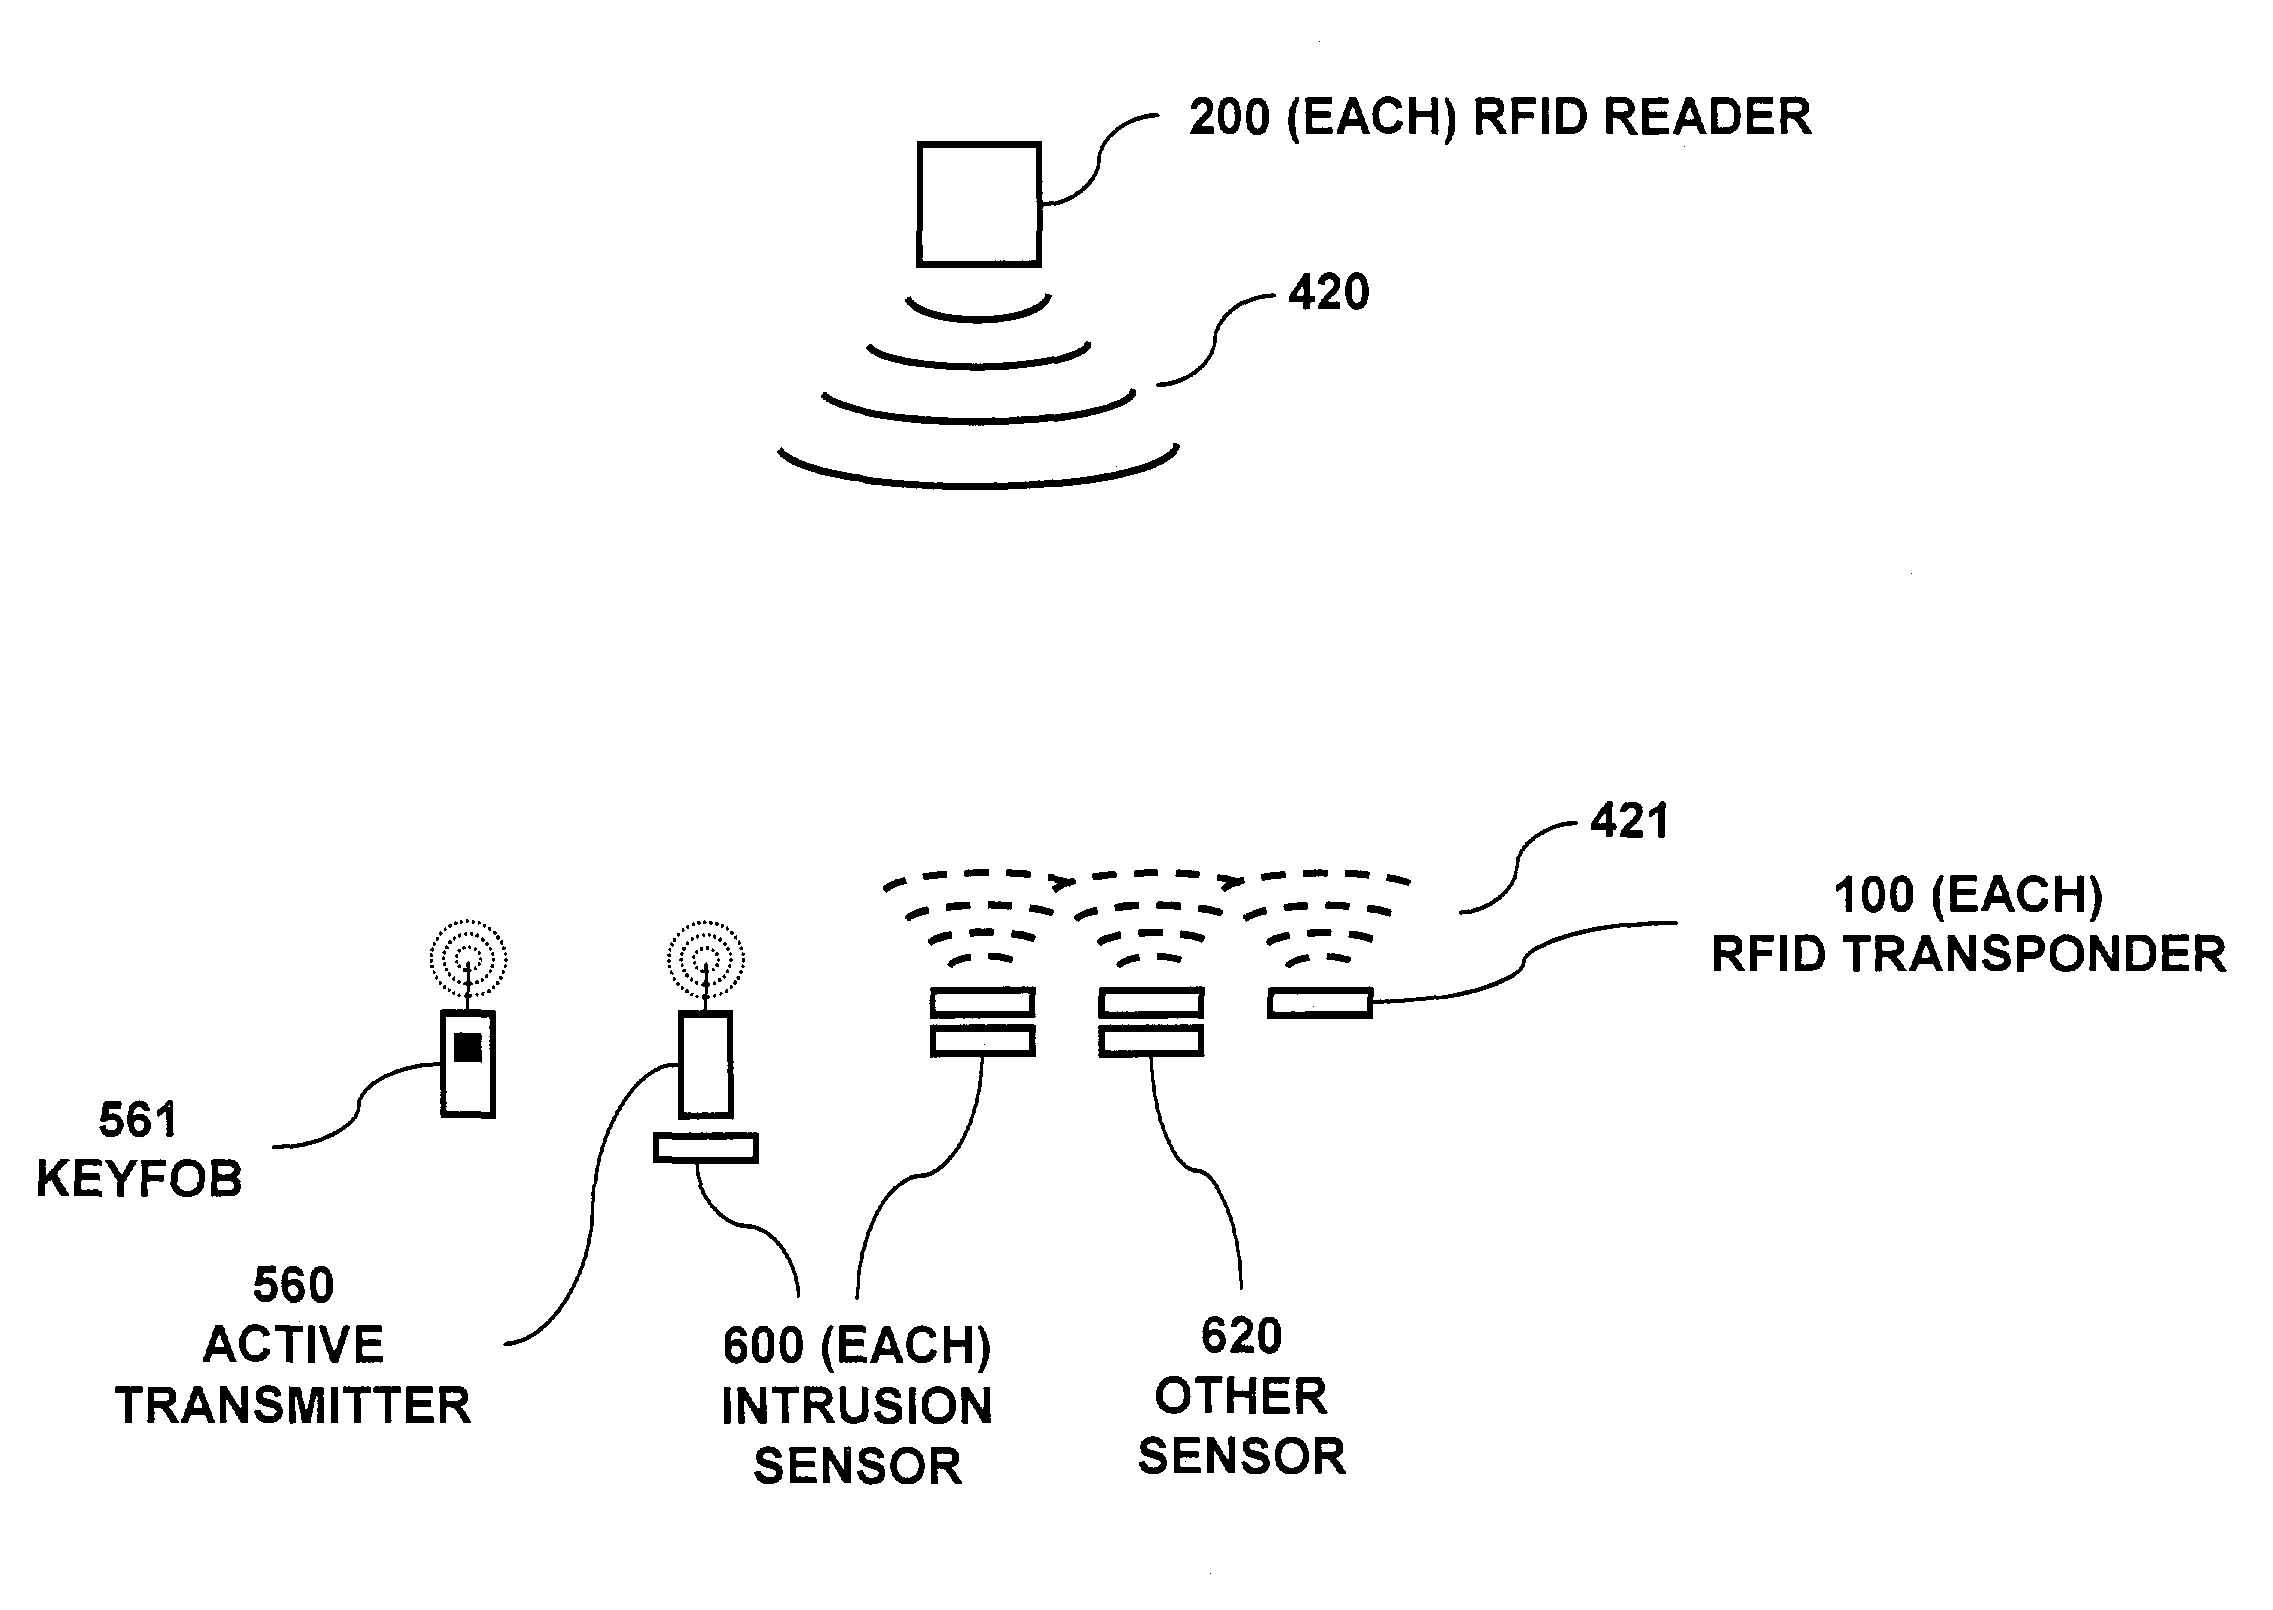 RFID reader for a security network